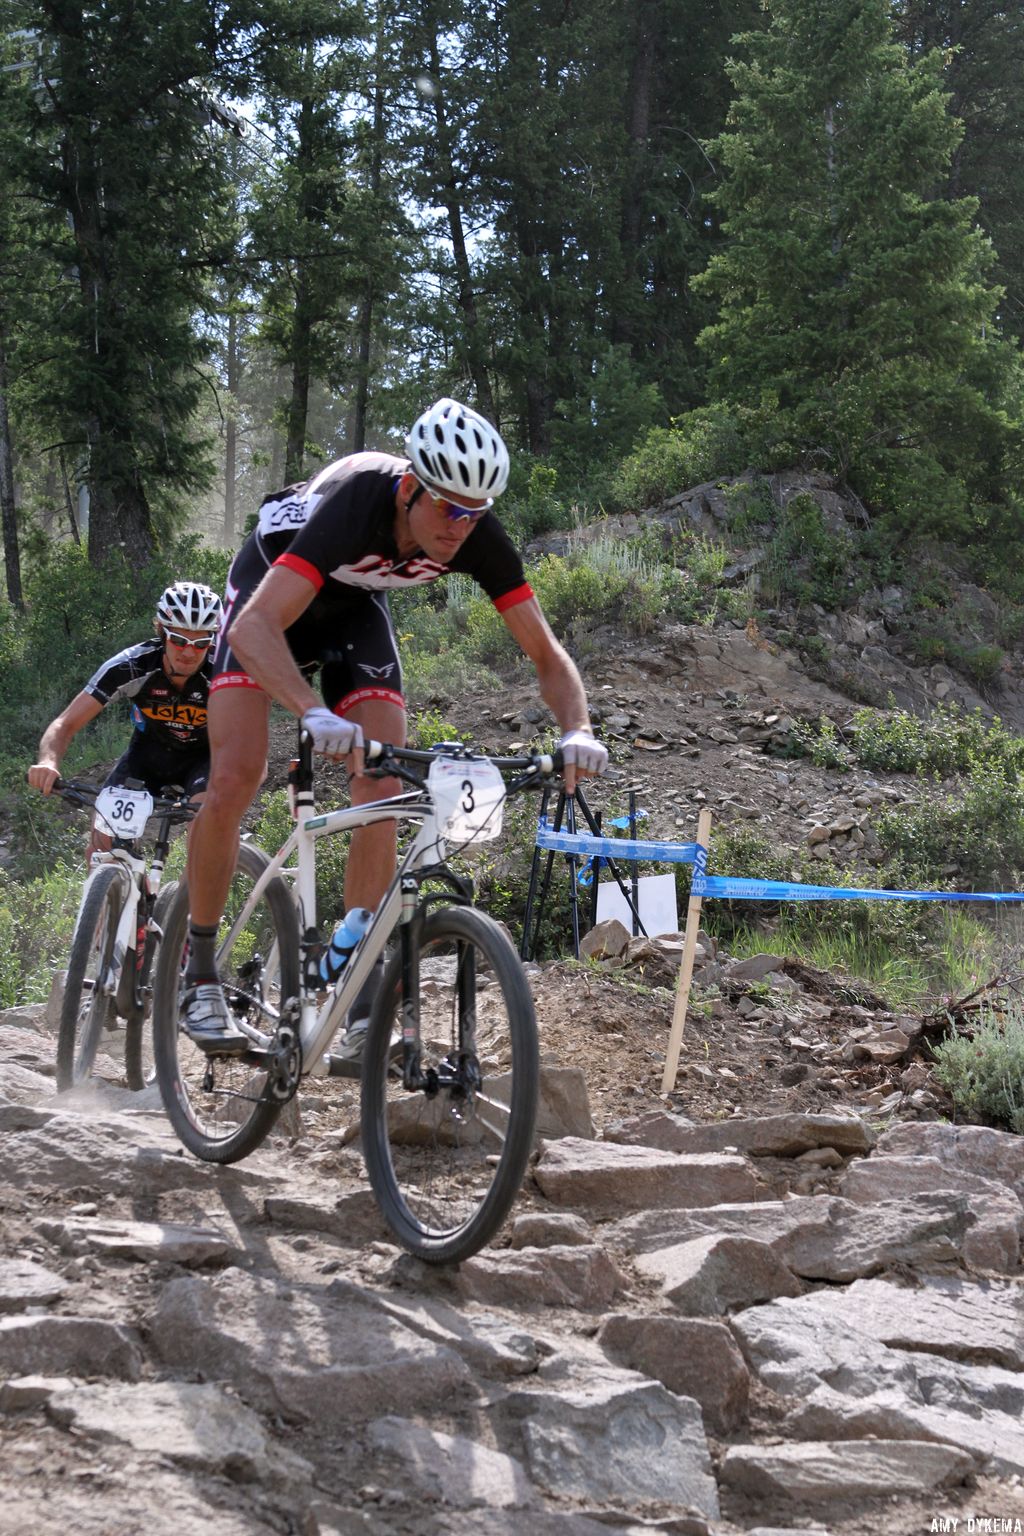 Ryan Trebon at the end of the first lap coming through the rock drop. ©Amy Dykema